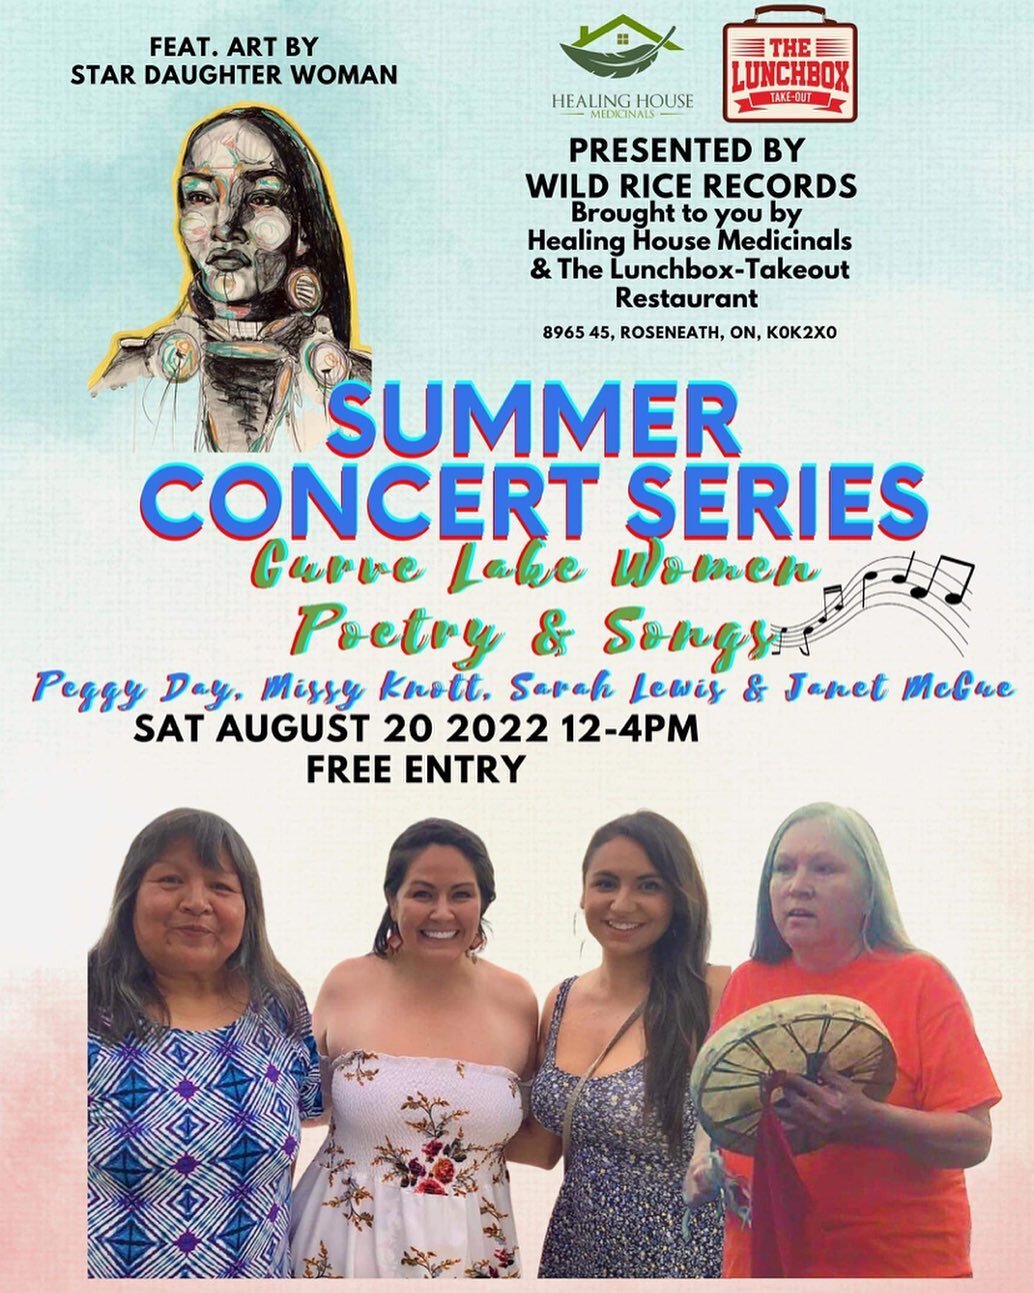 I&rsquo;m so lucky to be able to perform alongside such powerful Kwe&rsquo;s from our community&hearts;️. Curve Lake women rock. It&rsquo;s going to be a good one! I can&rsquo;t wait☺️ @wildricerecordsdotcom @healinghousemedicinals_